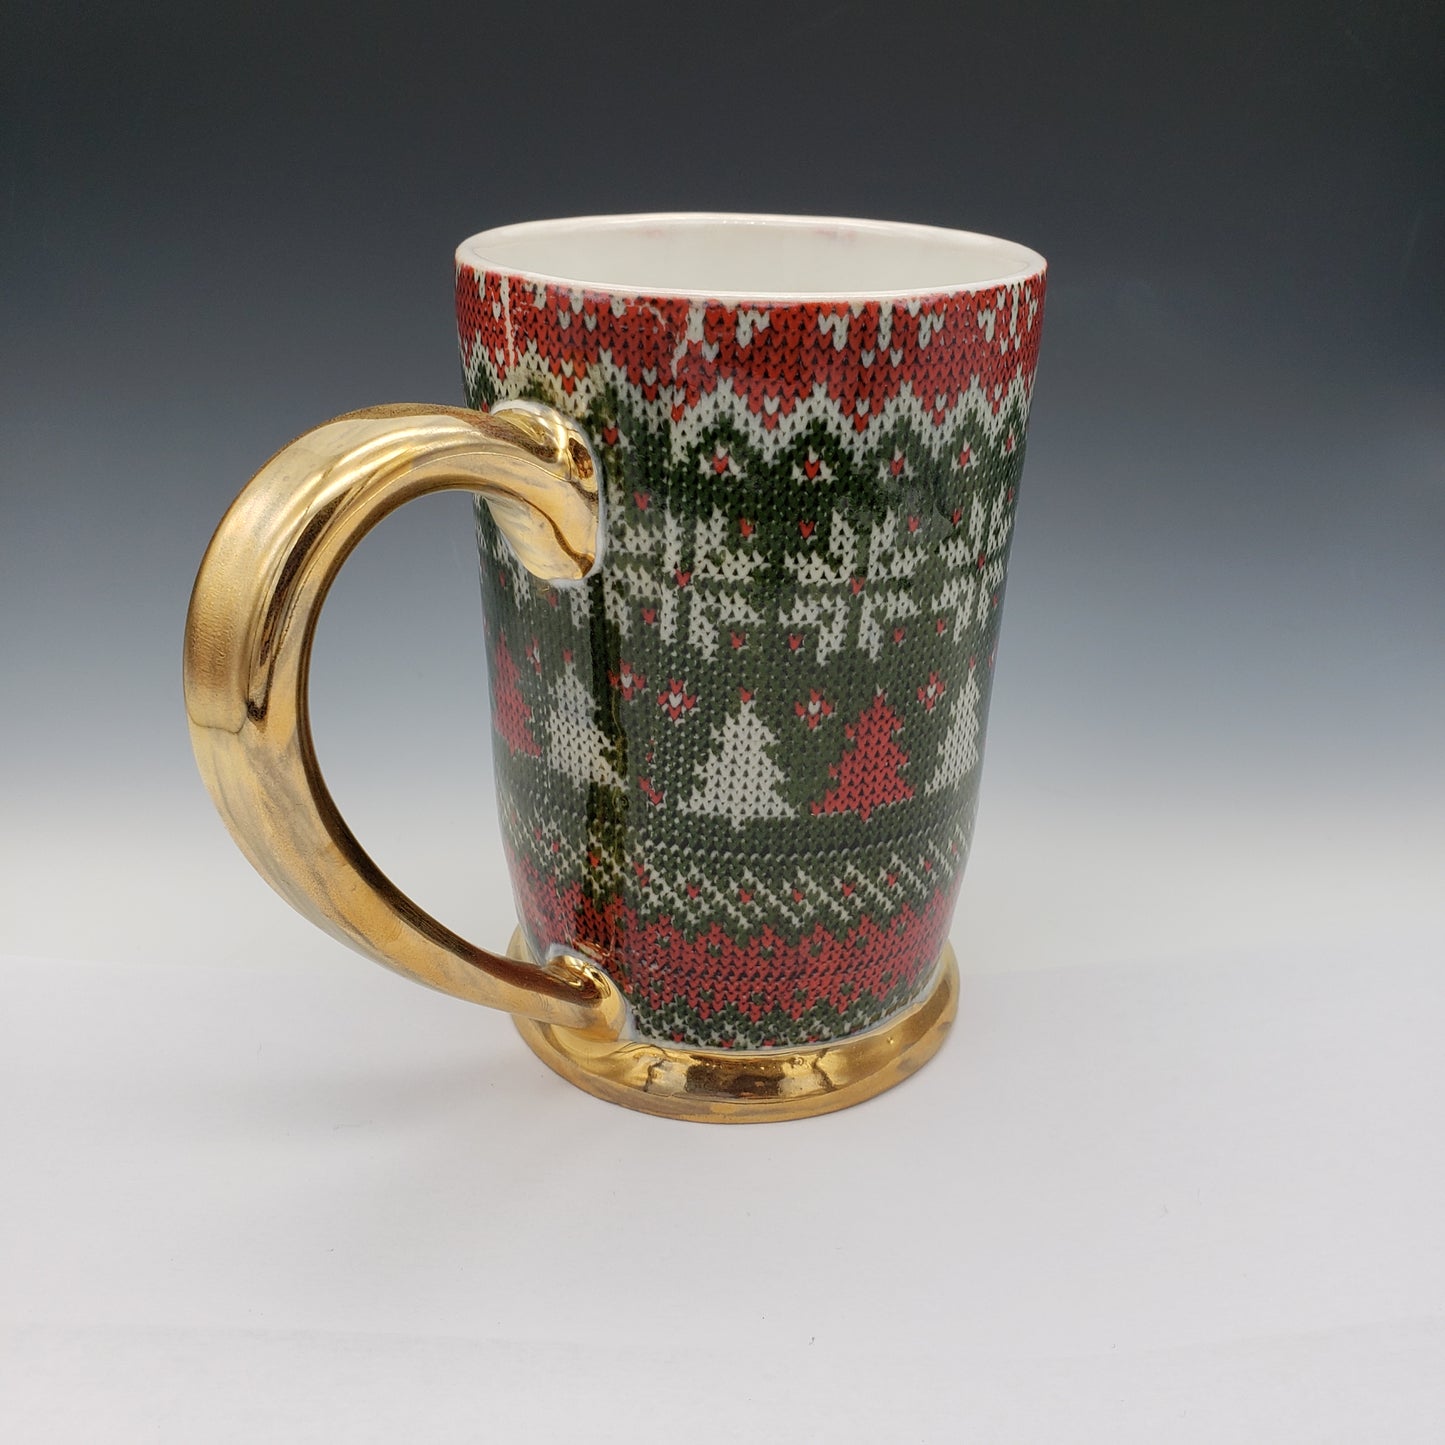 Red and green ugly sweater mug with 22k yellow gold handle and base